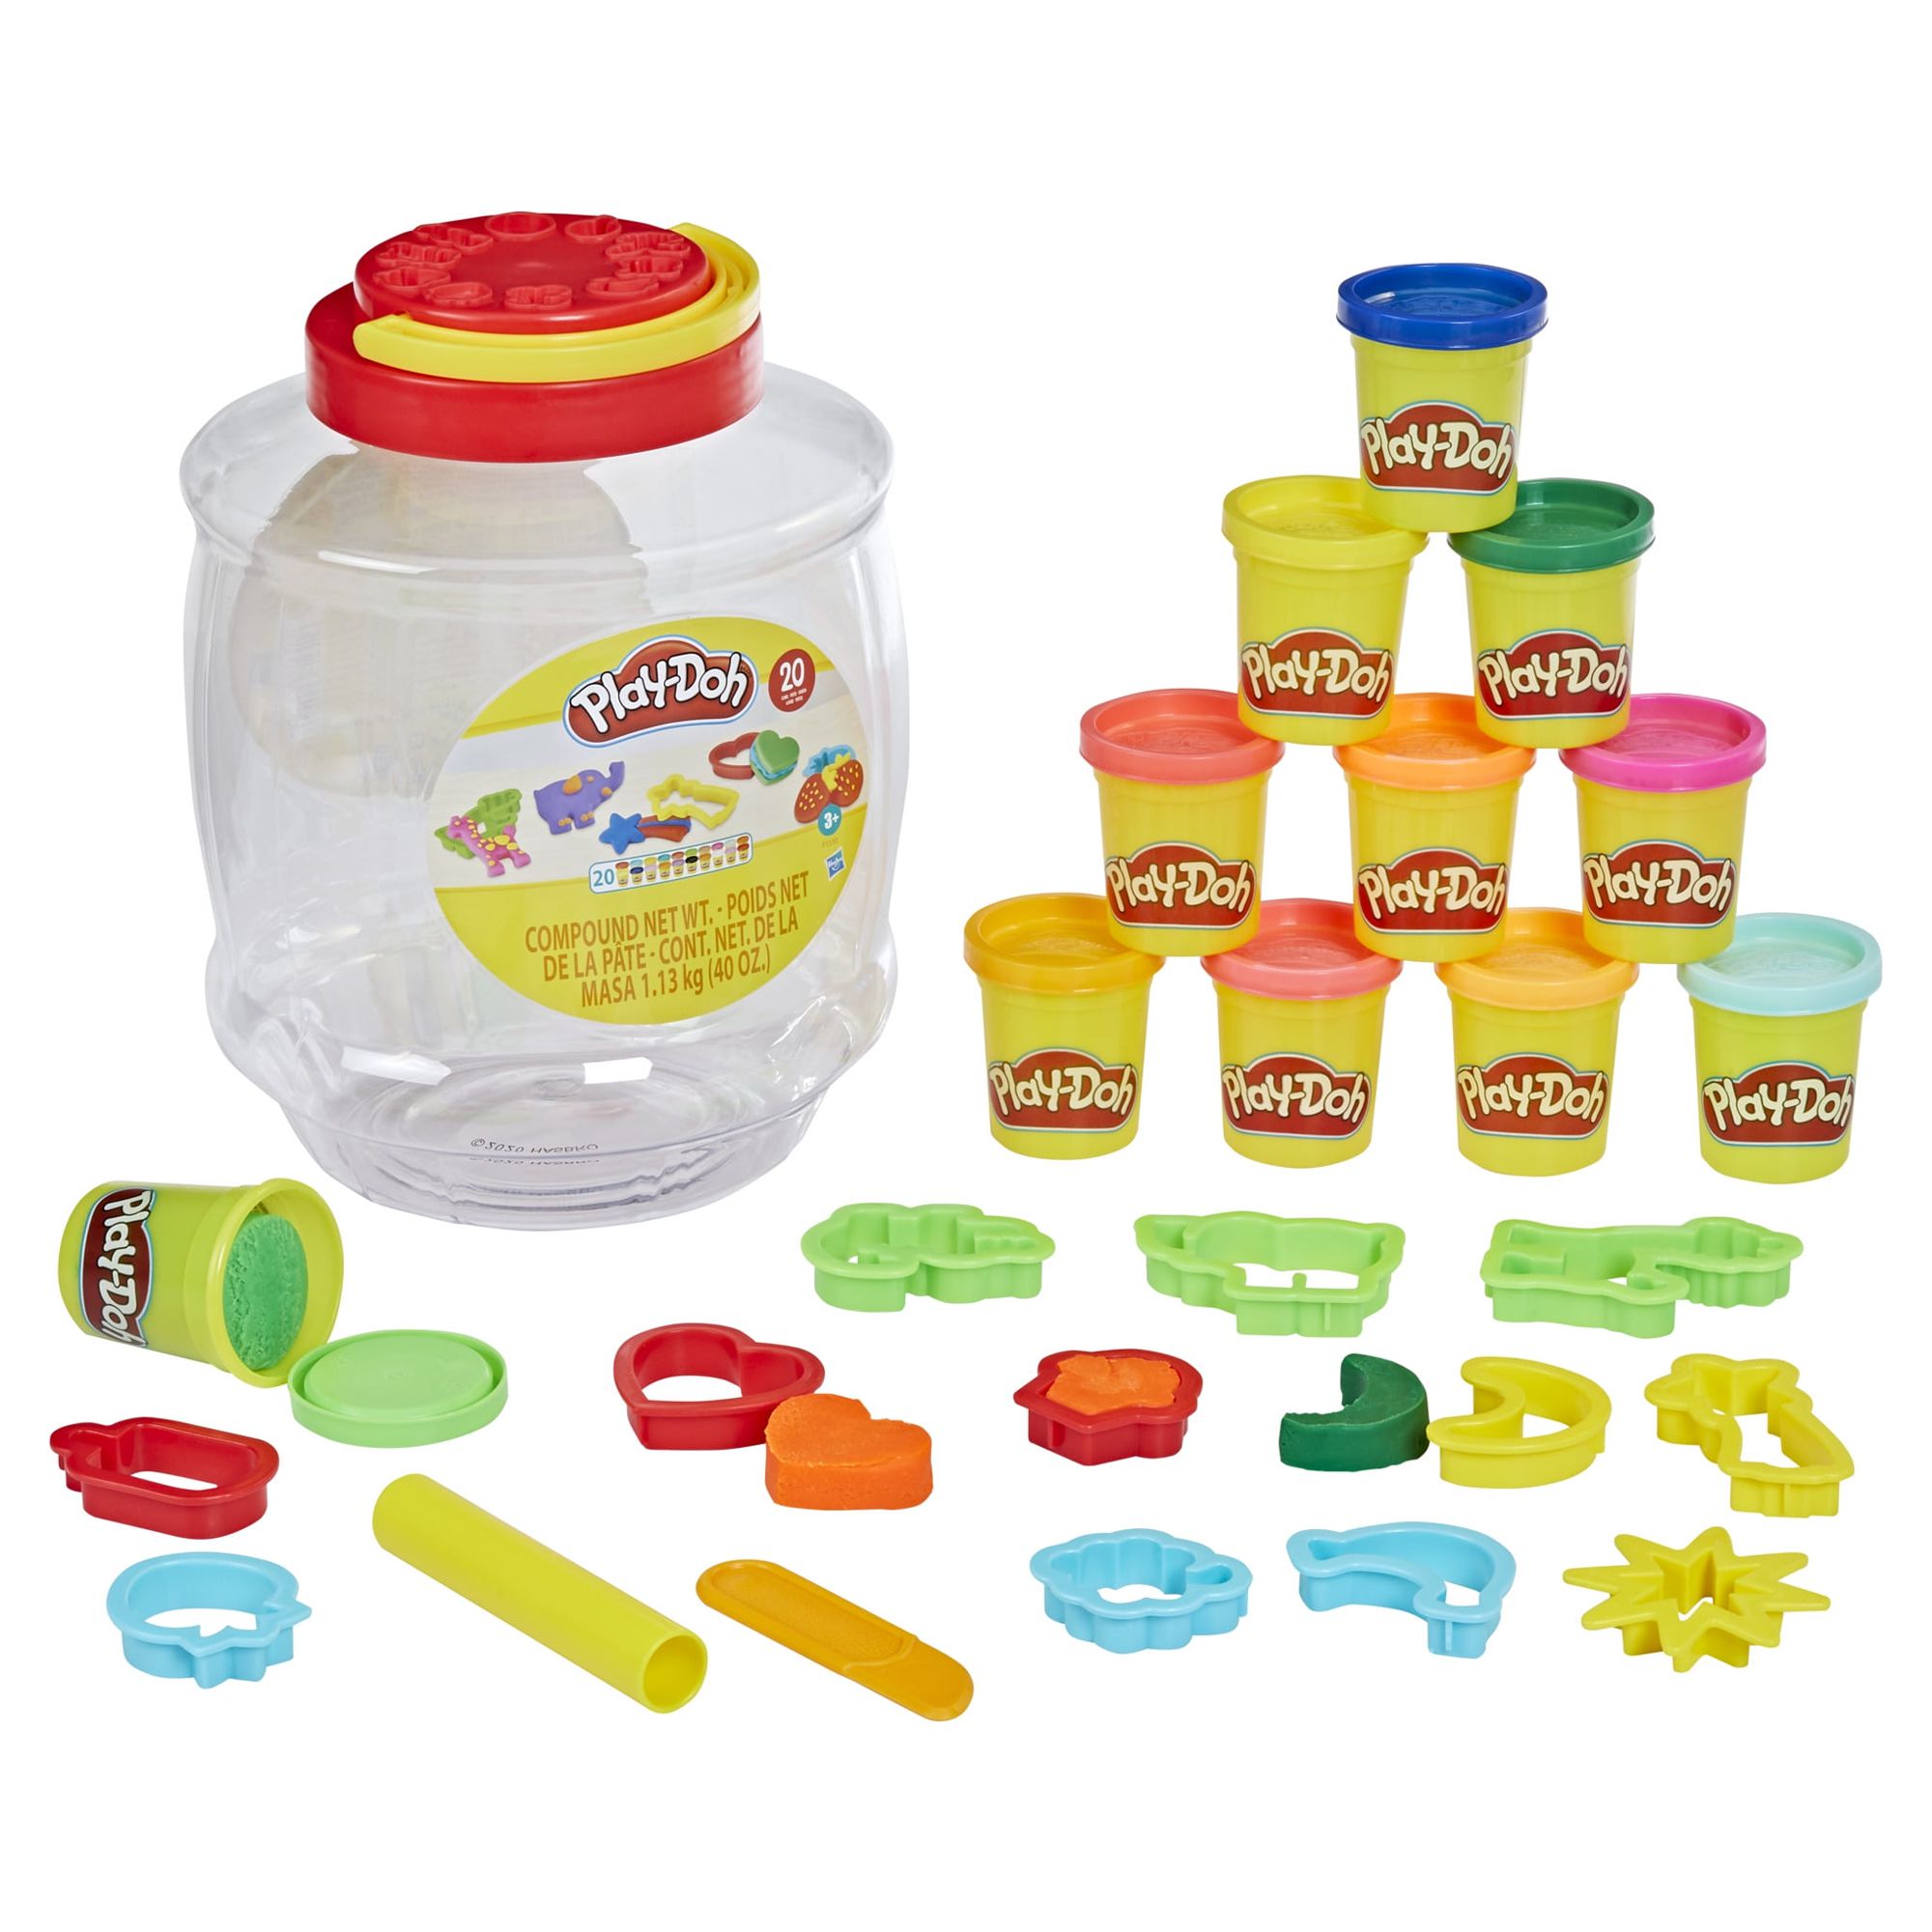 Play-Doh Bucket of Fun Play Dough Set - 20 Colors (20 Piece), Only At Walmart - image 1 of 8